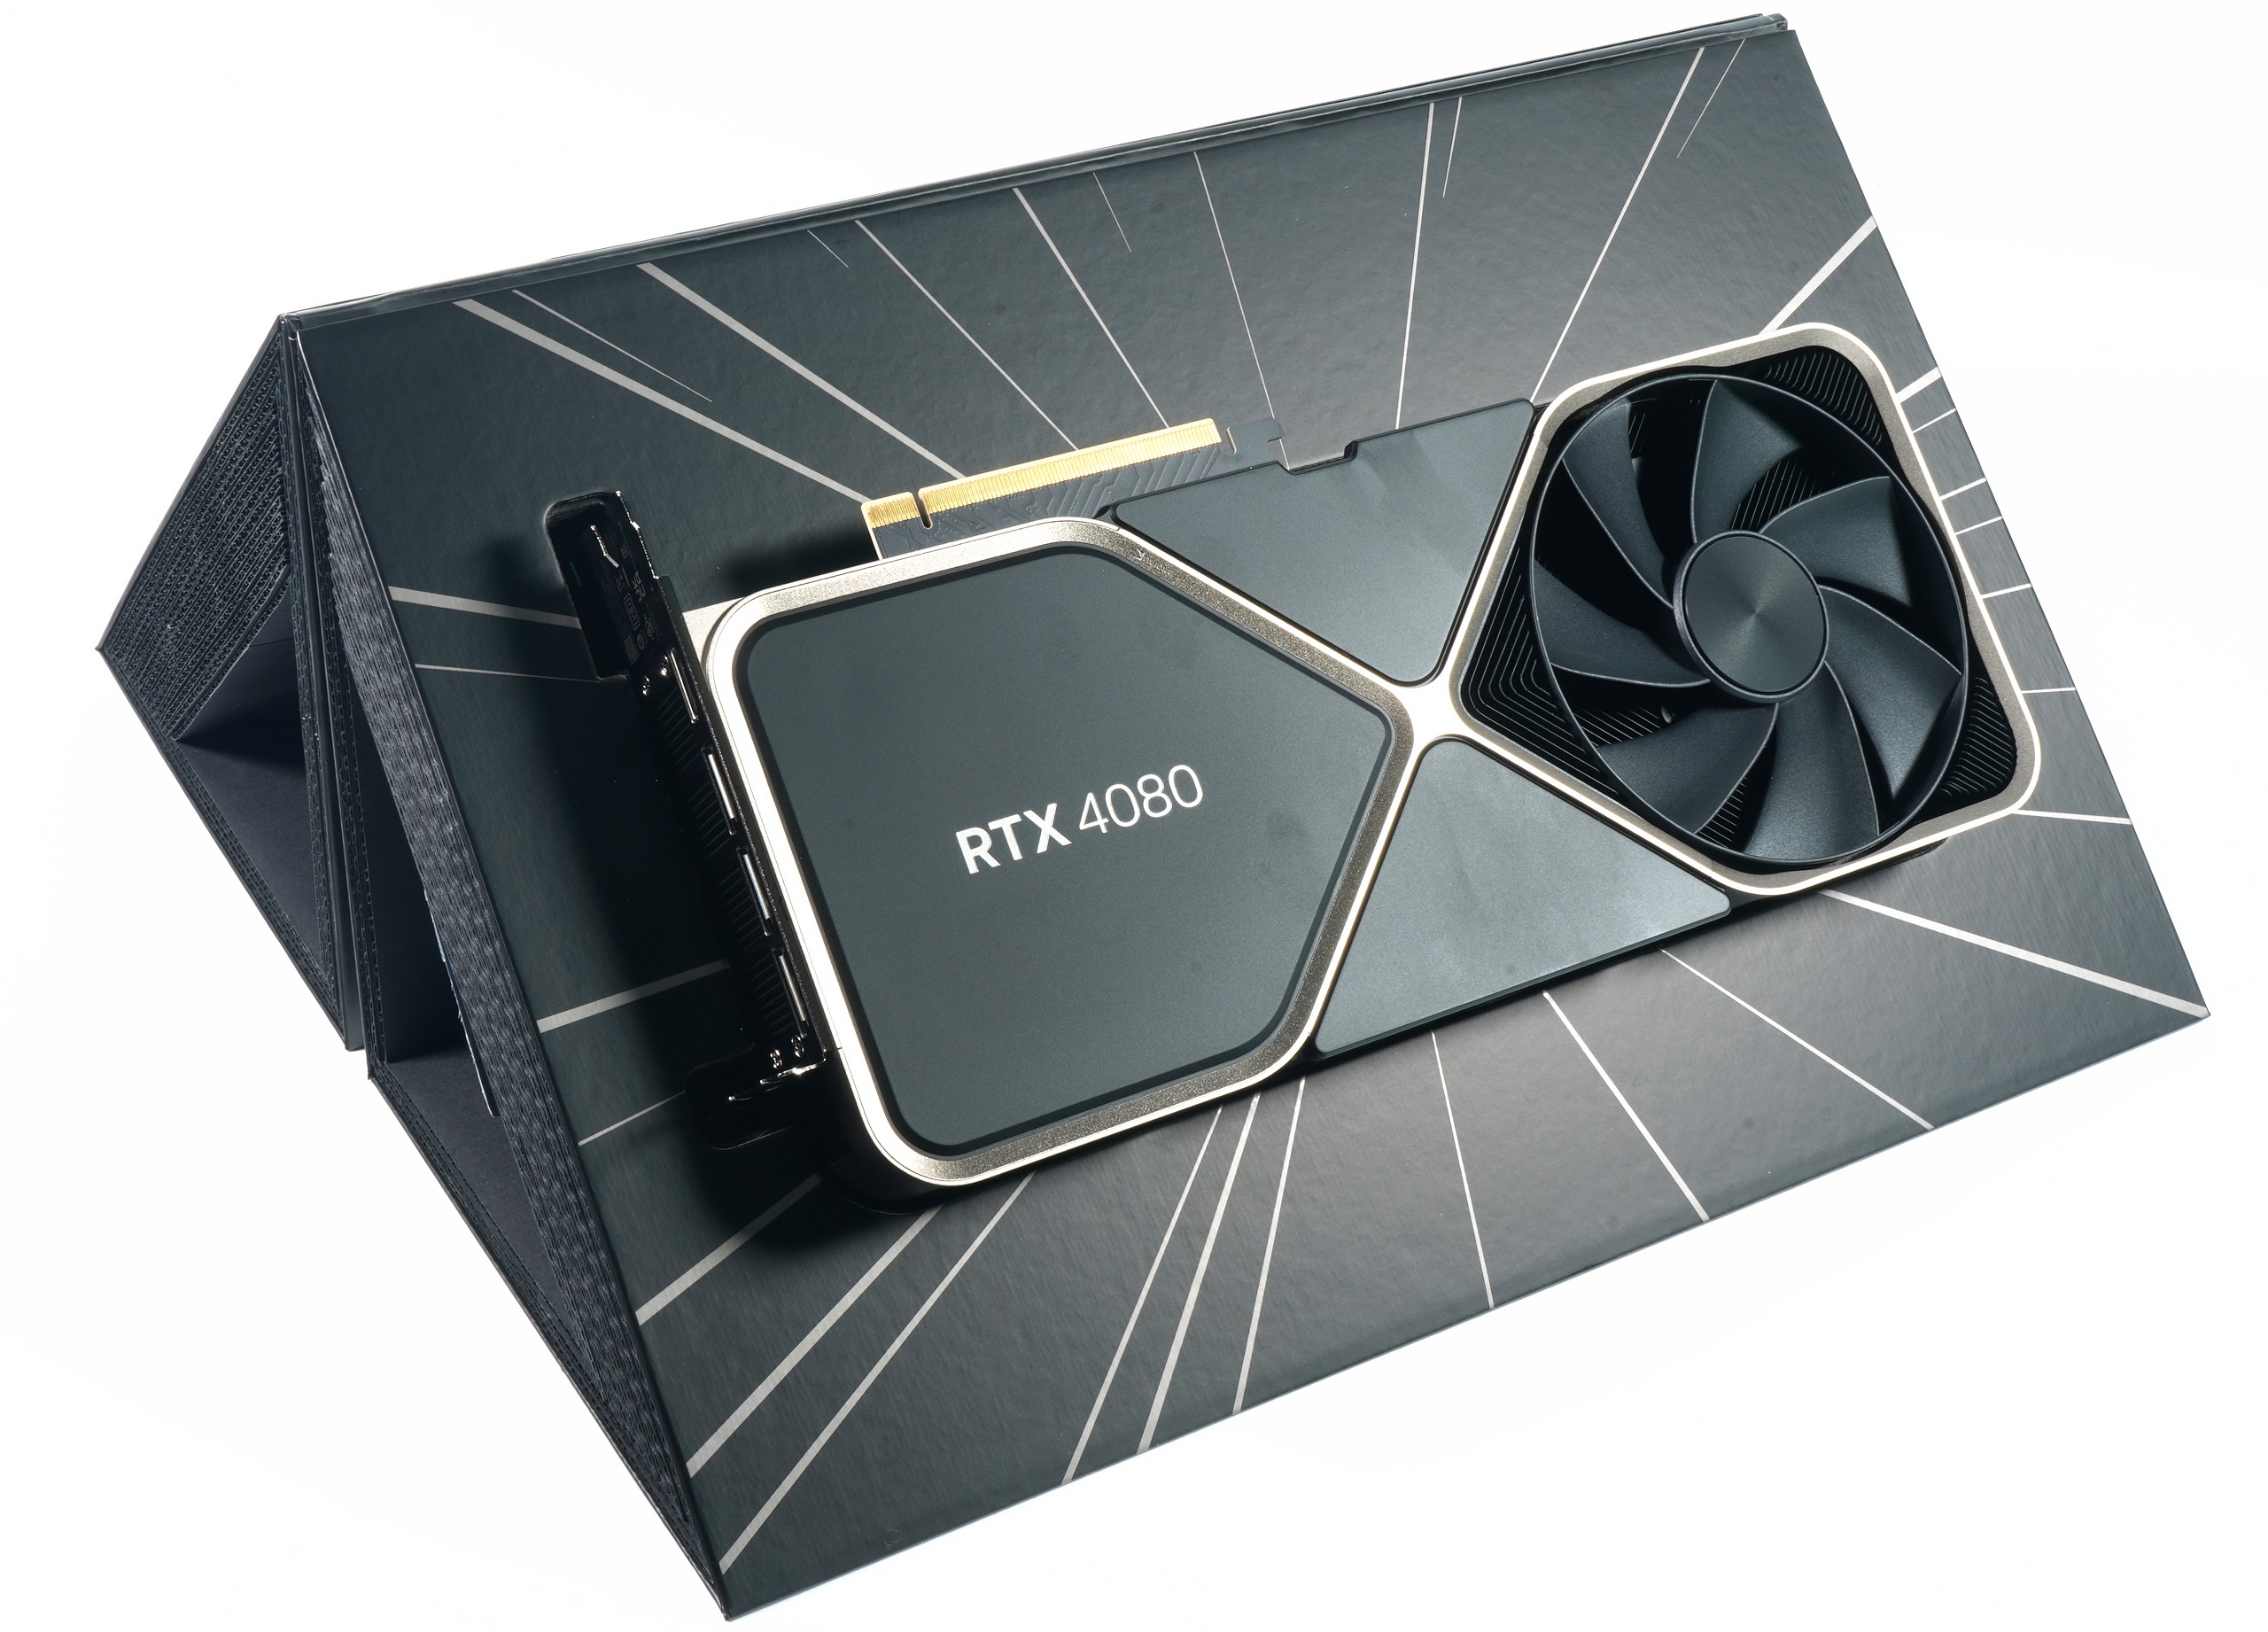 NVIDIA GeForce RTX 4080 review -- The Good 4080 is actually